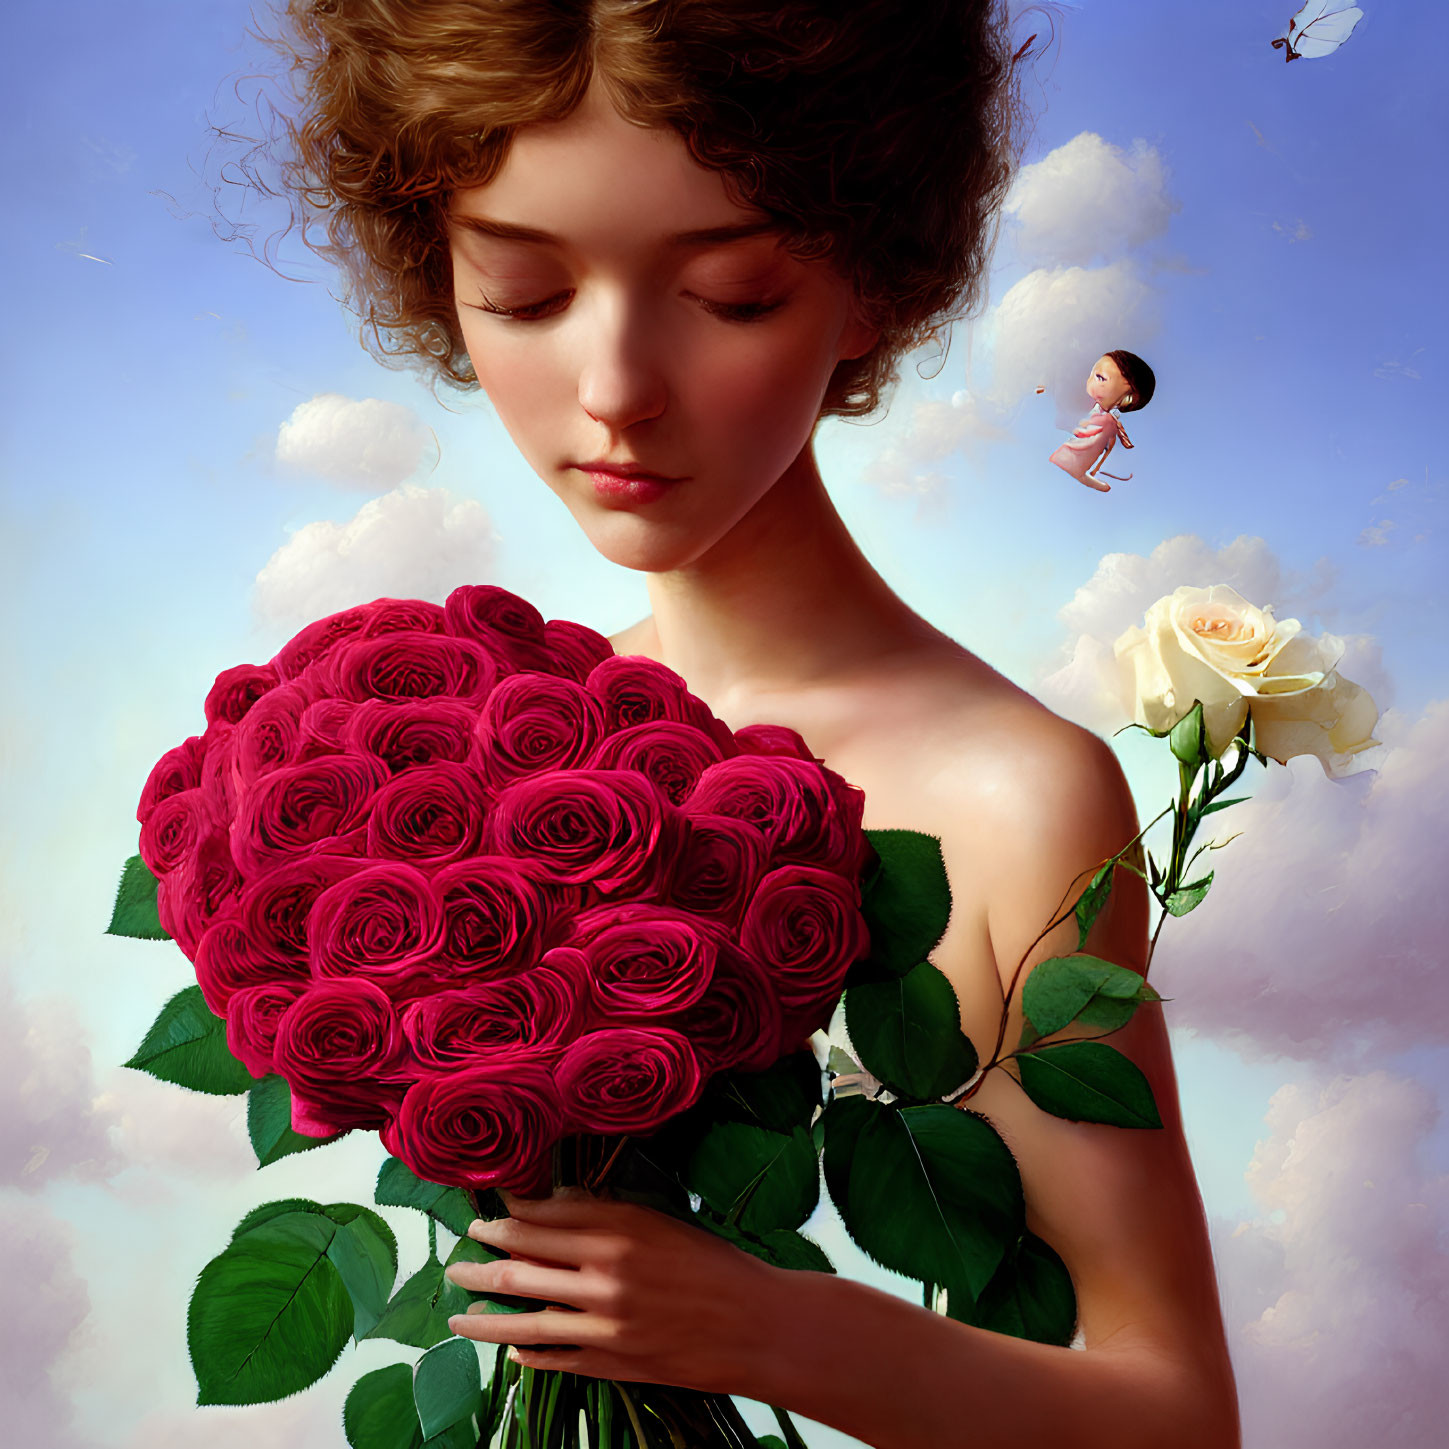 Surreal woman with curly hair holding roses under cloudy sky